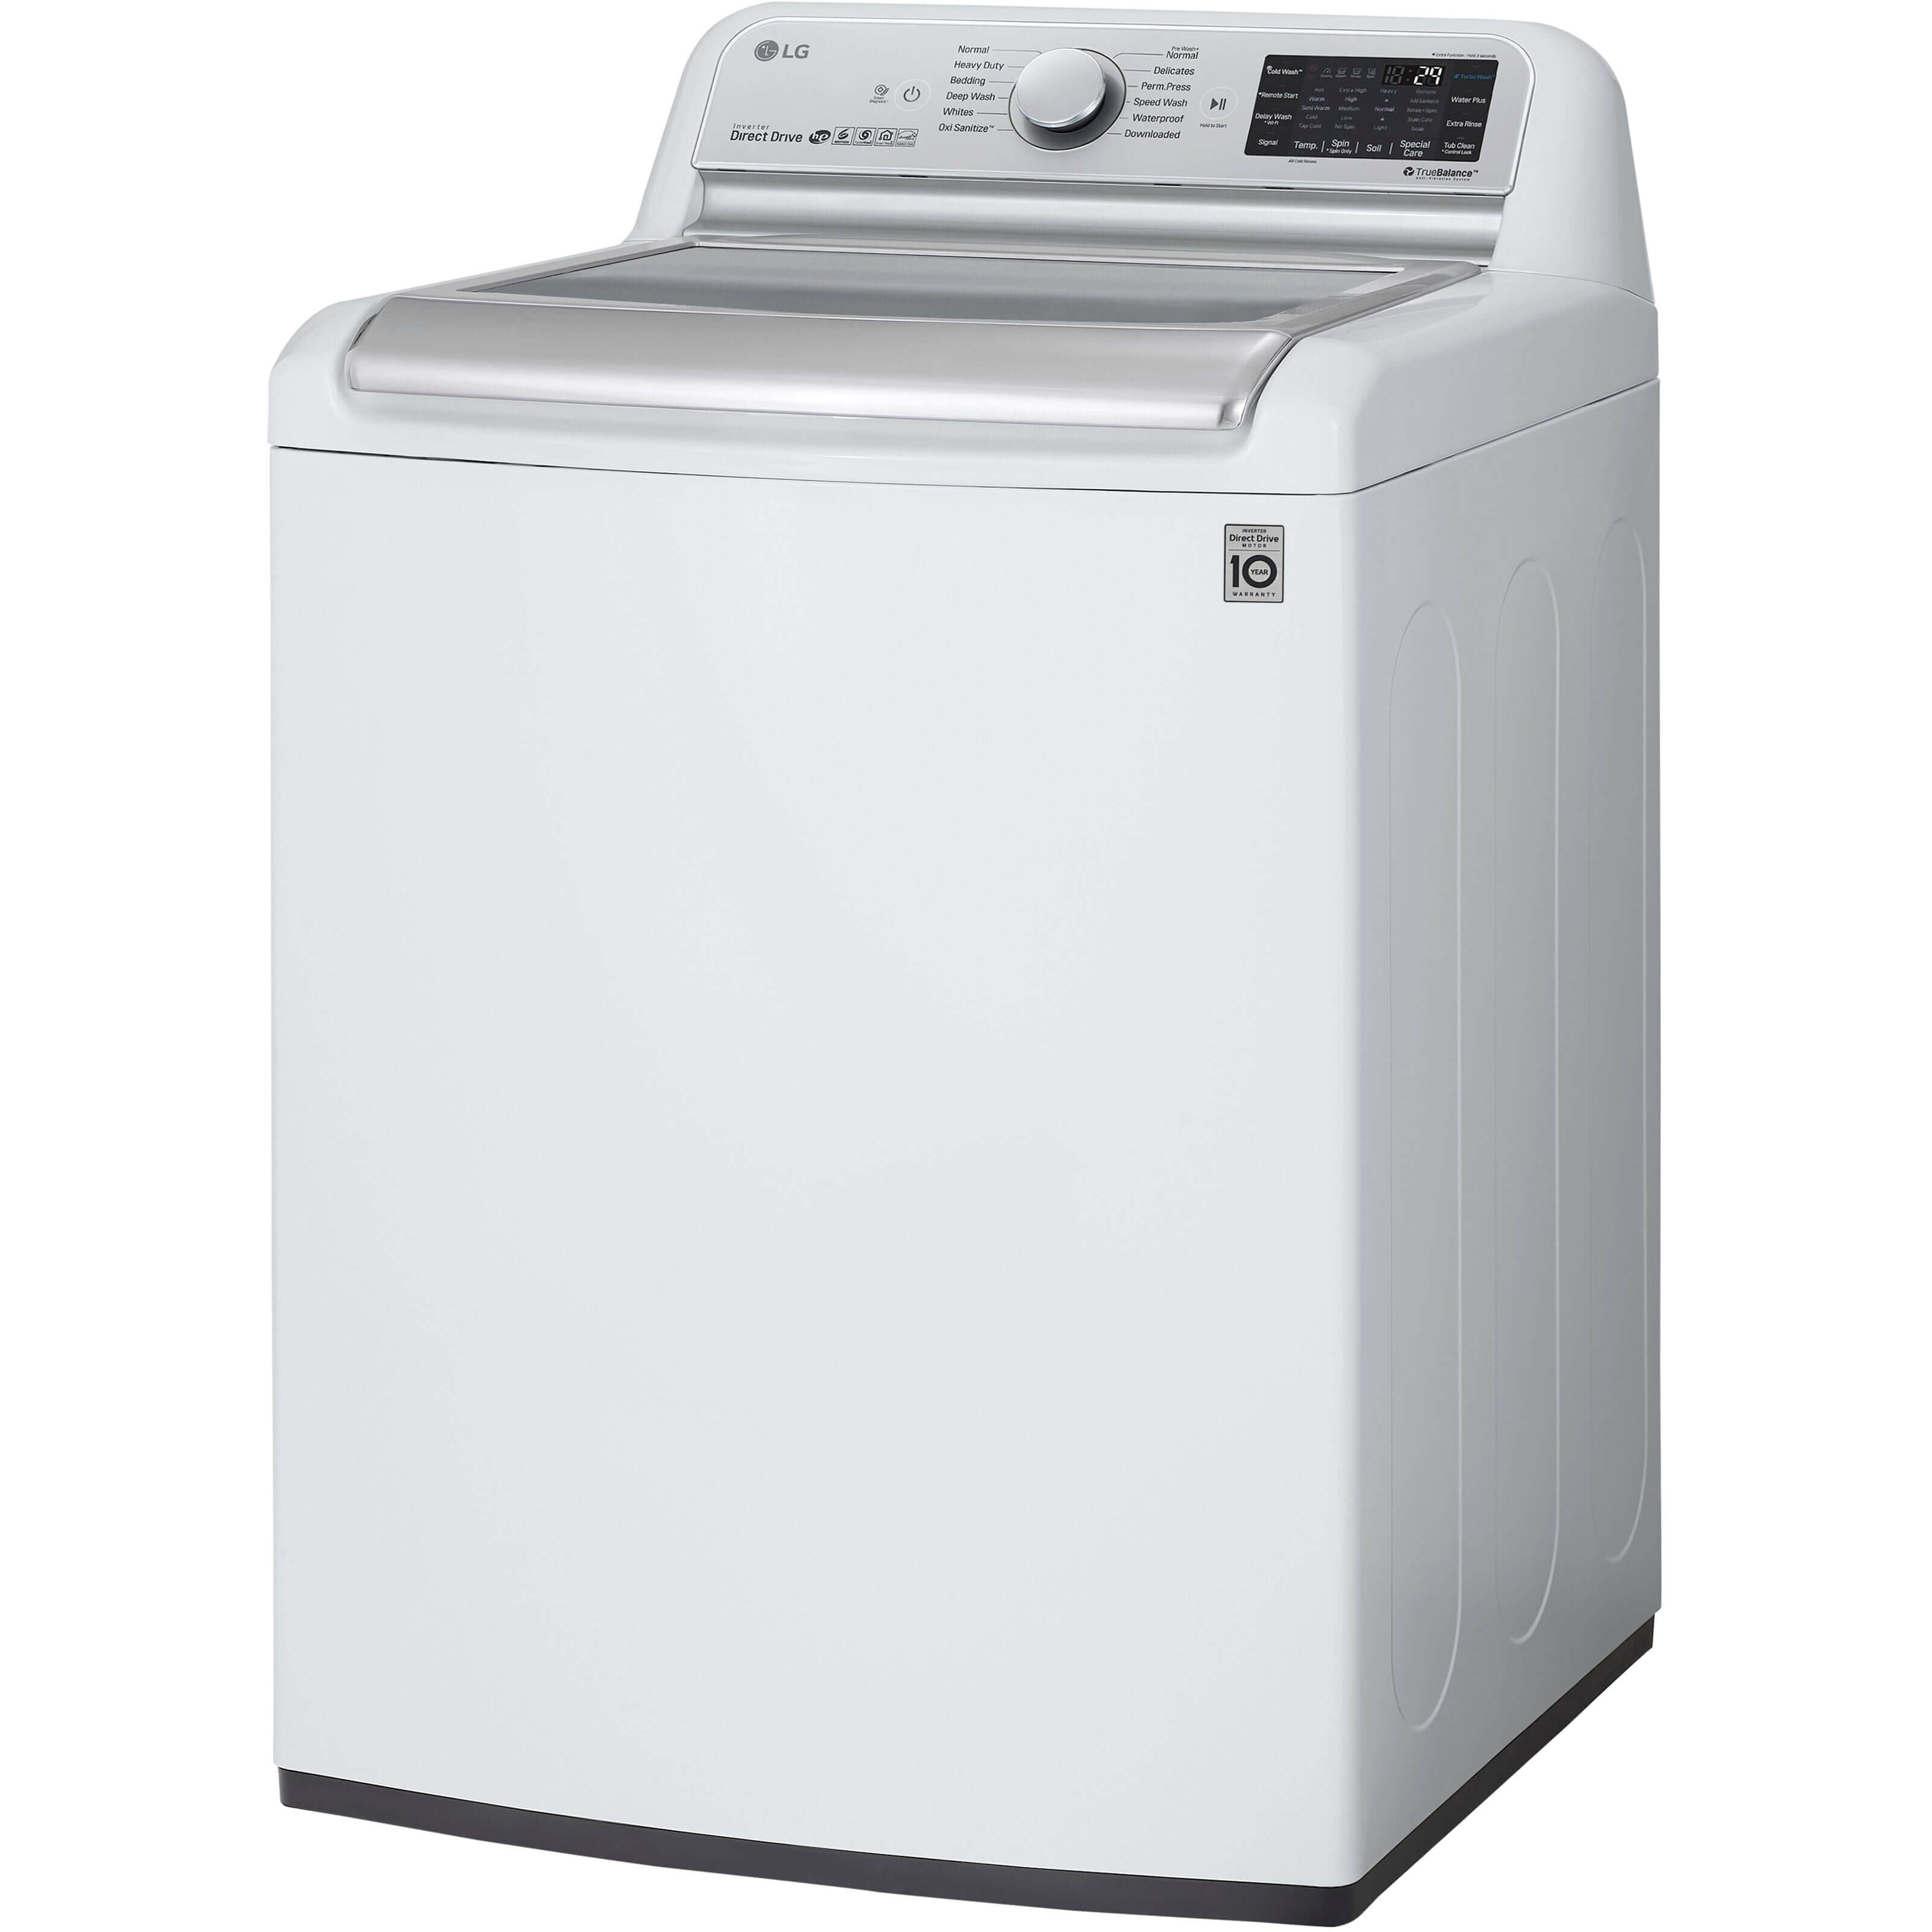 LG 27 Inch Smart wi-fi Enabled Top Load Washer with TurboWash3D Technology in White 5.5 cu. ft. (WT7800CW)